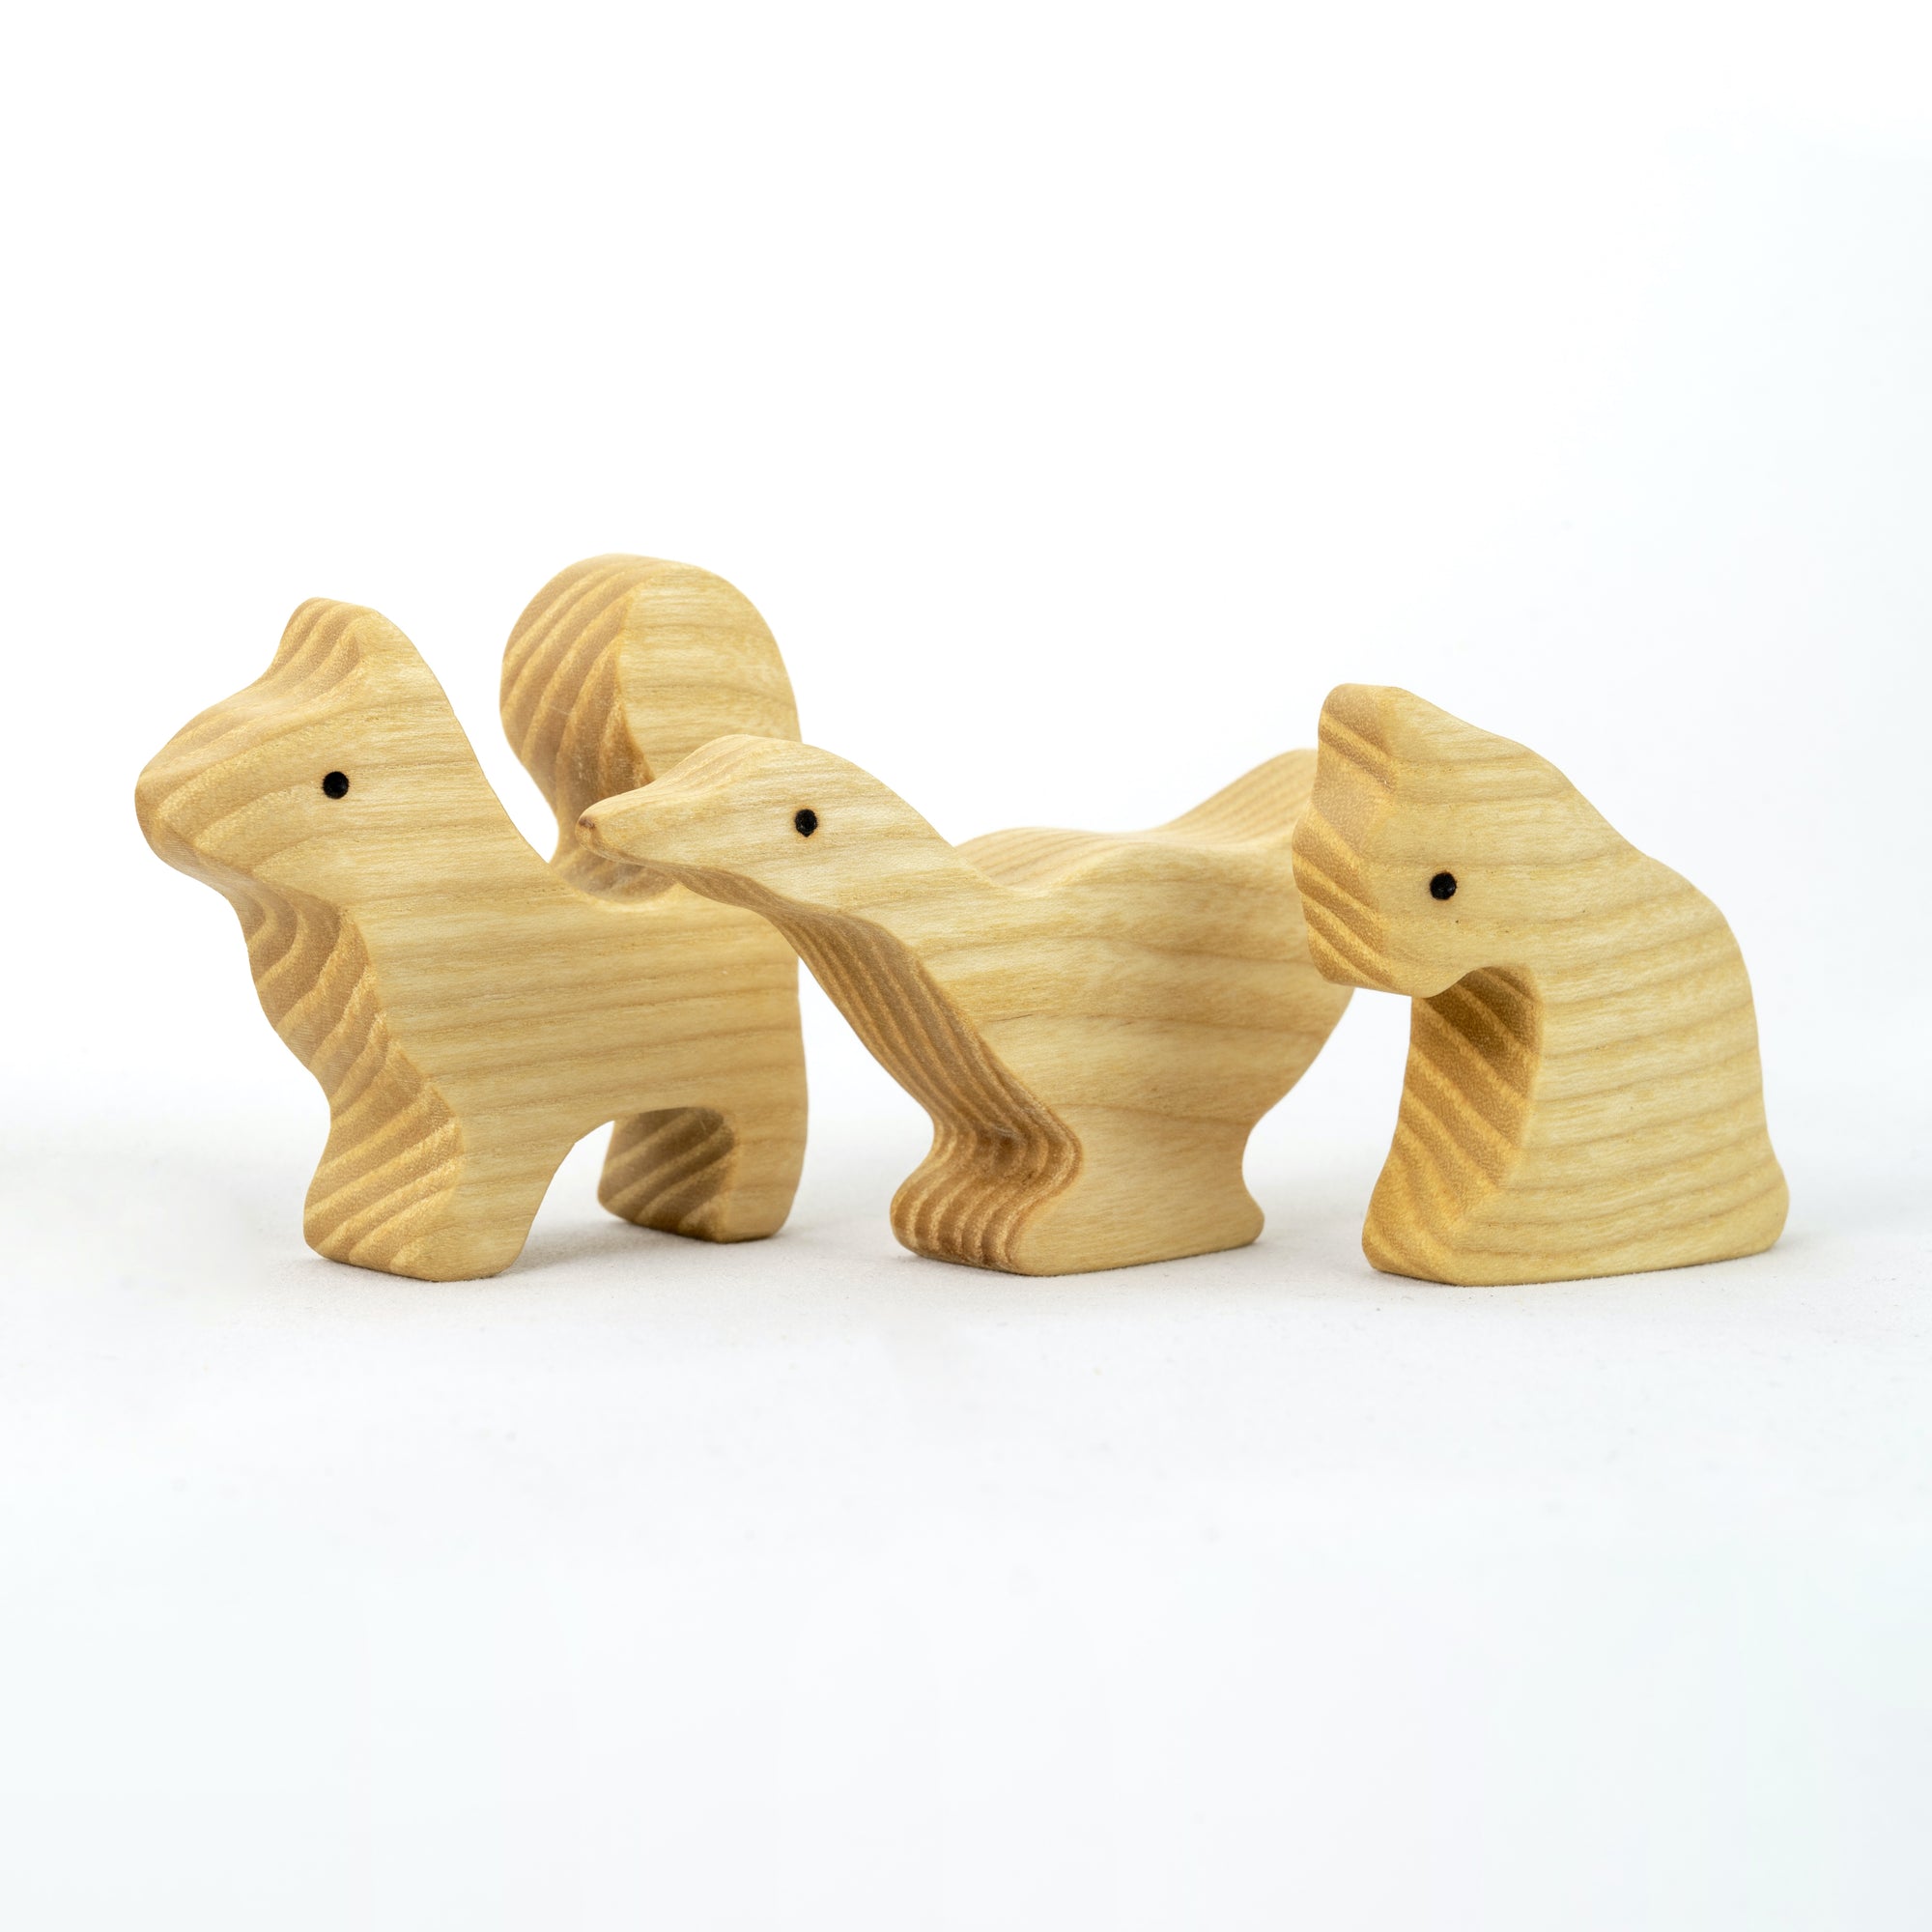 Waldorf Wooden Animals Natural Wooden Toys for Toddlers, Kids